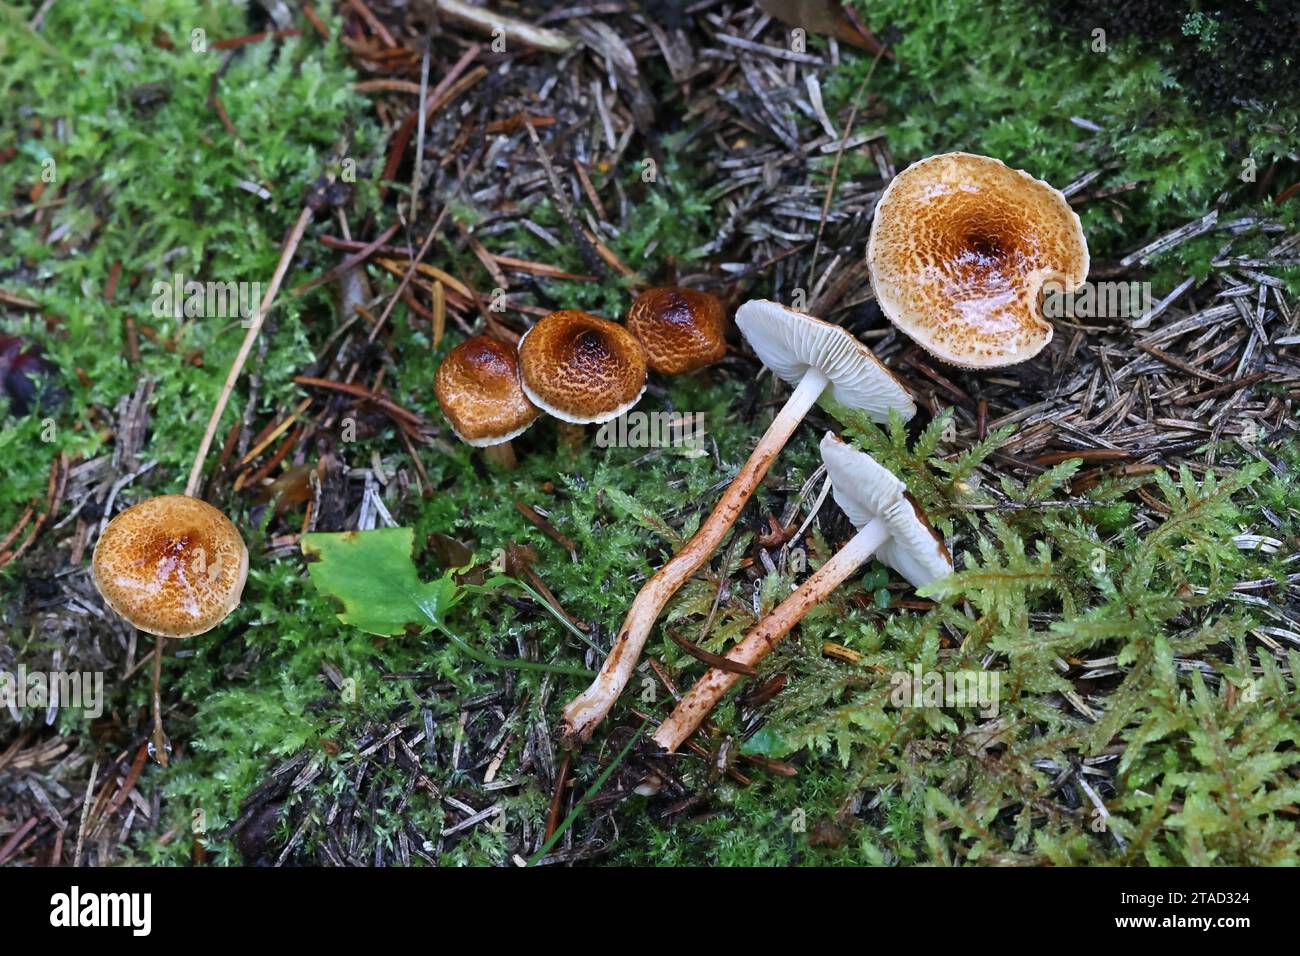 Lepiota castanea, commonly known as the chestnut dapperling, a poisonous mushroom from Finland Stock Photo